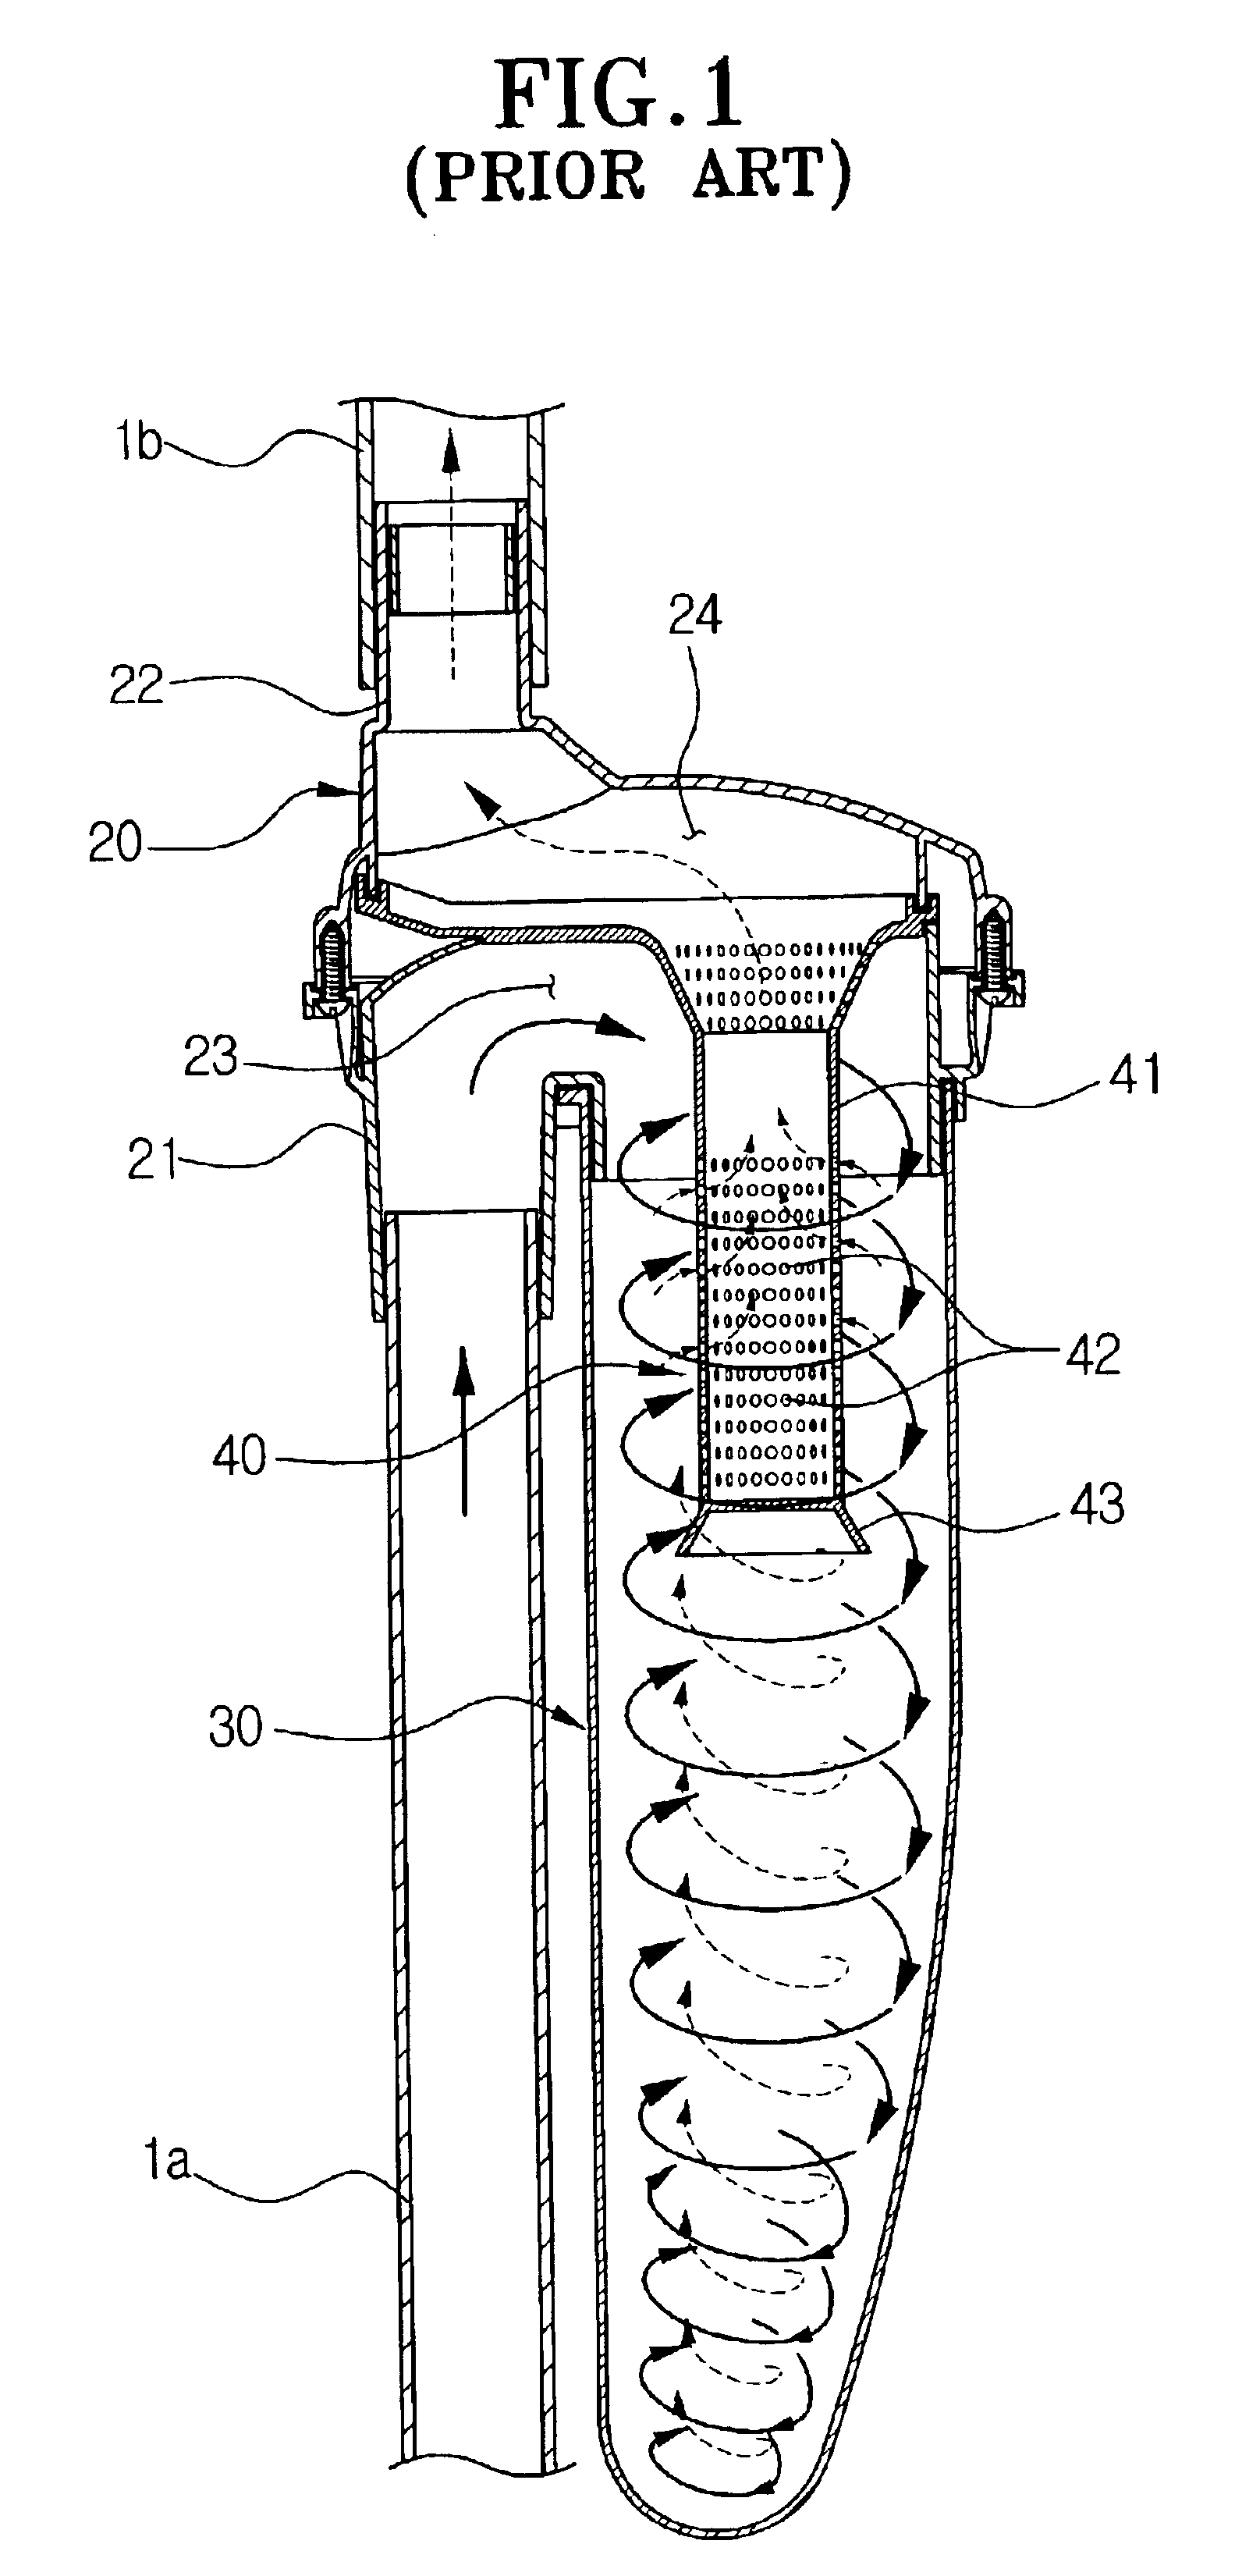 Cyclone-type dust collecting apparatus for vacuum cleaner